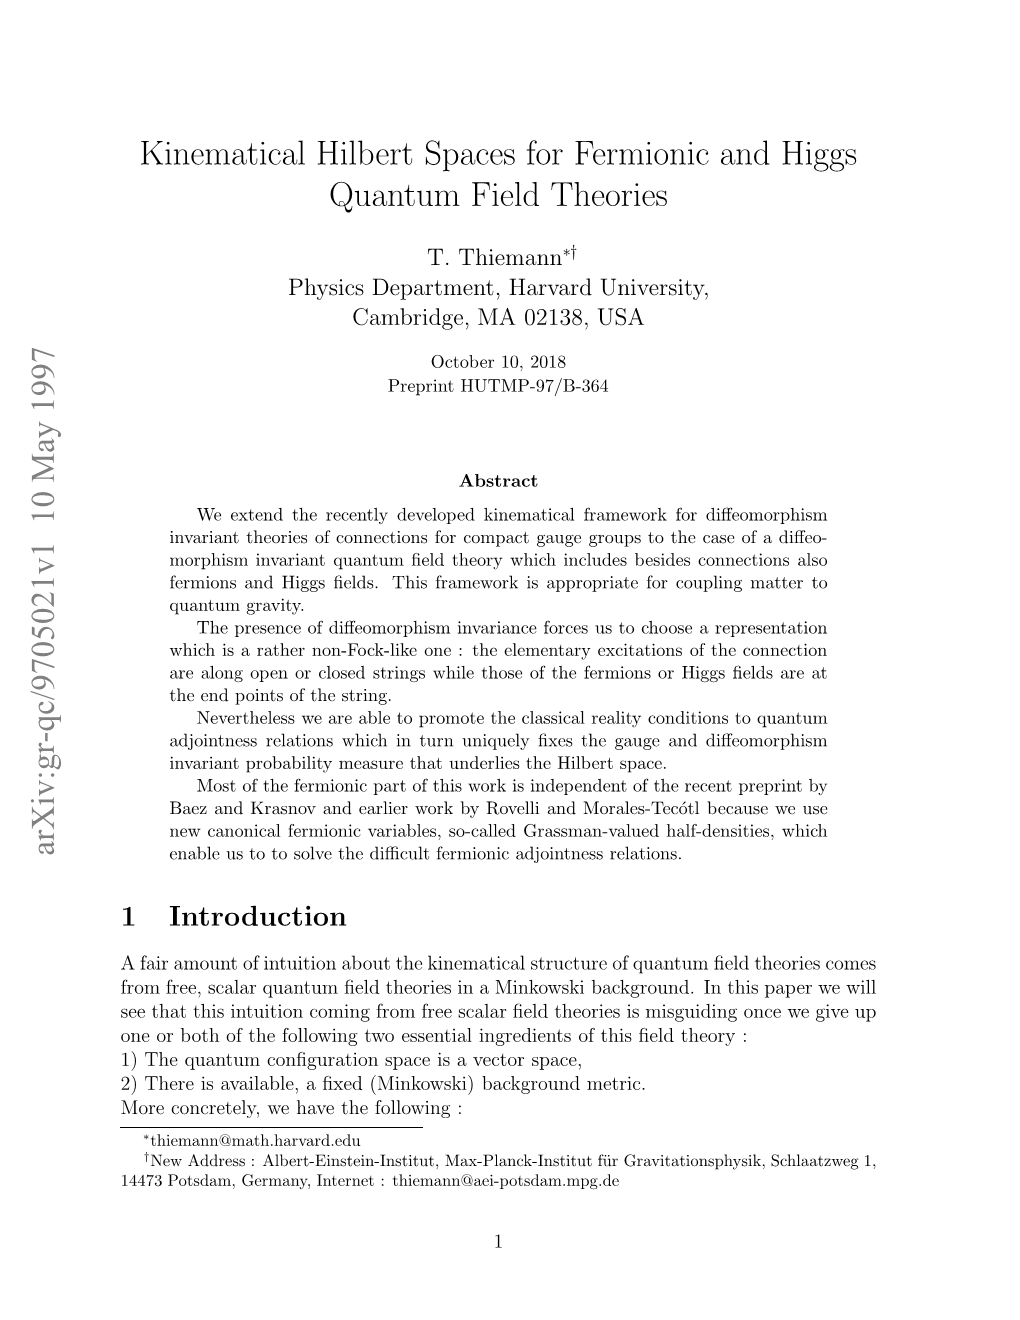 Kinematical Hilbert Spaces for Fermionic and Higgs Quantum